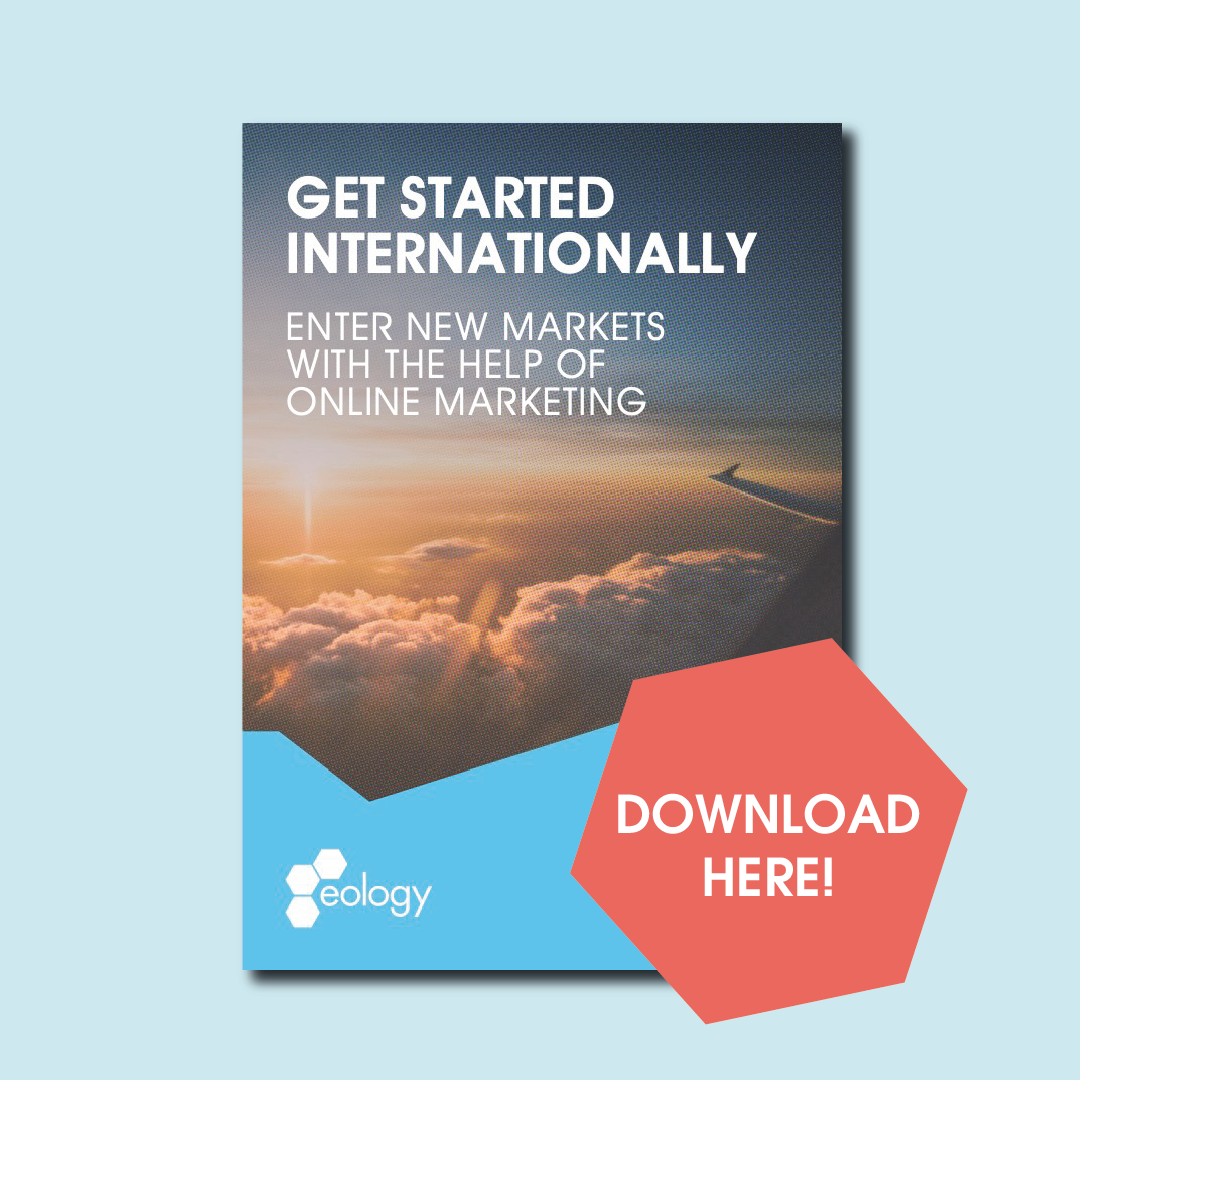 Whitepaper - Get started internationally. Enter new markets with the help of online marketing.A good complement in the creation of your international content strategy.